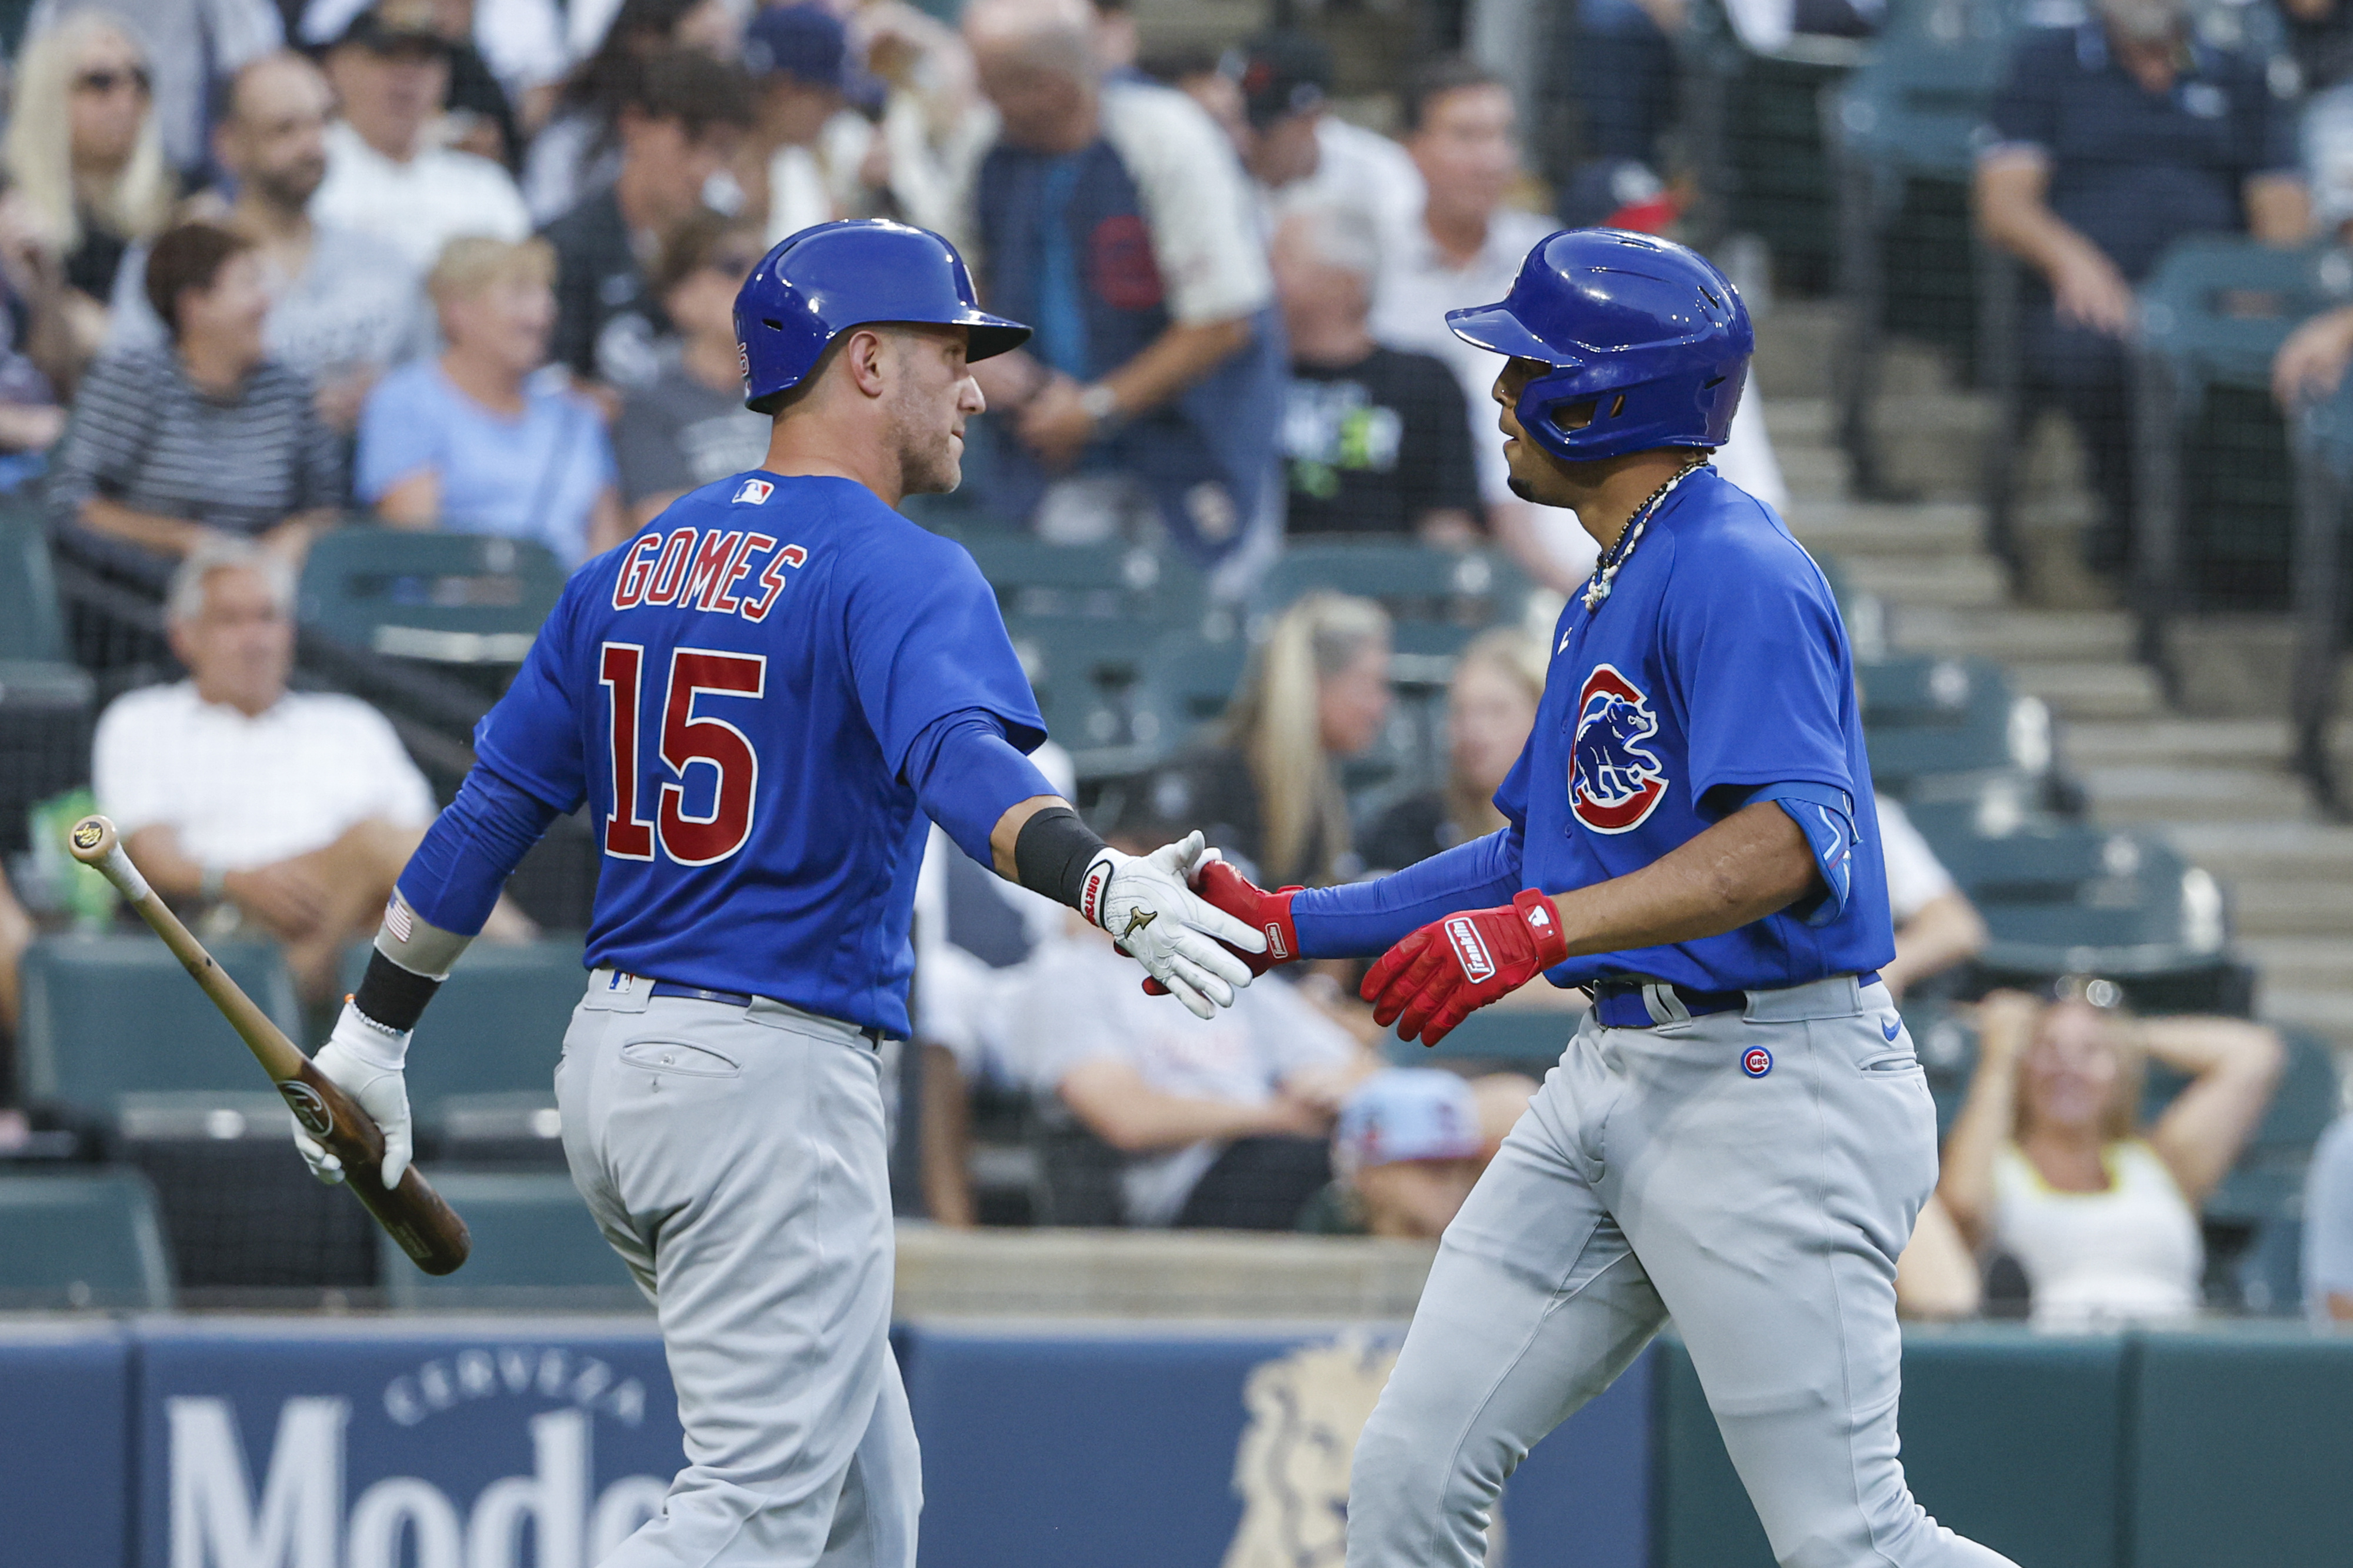 Dansby Swanson homers twice as Cubs top White Sox